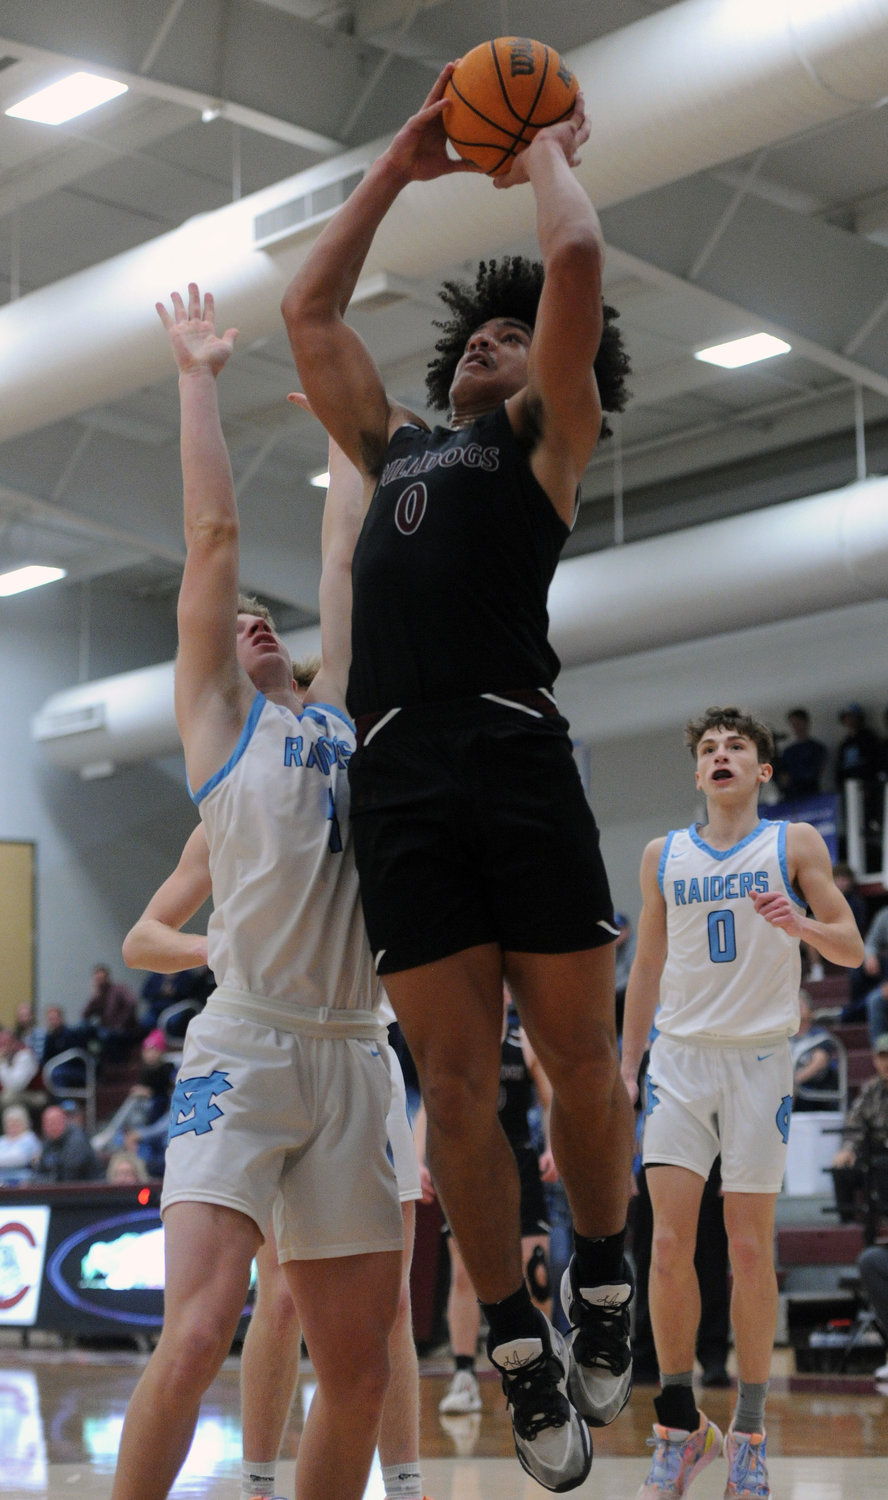 Ben Franklin muscles his way to the rim on a put-back and scores for the Bulldogs. He scored 13 points on Monday night.